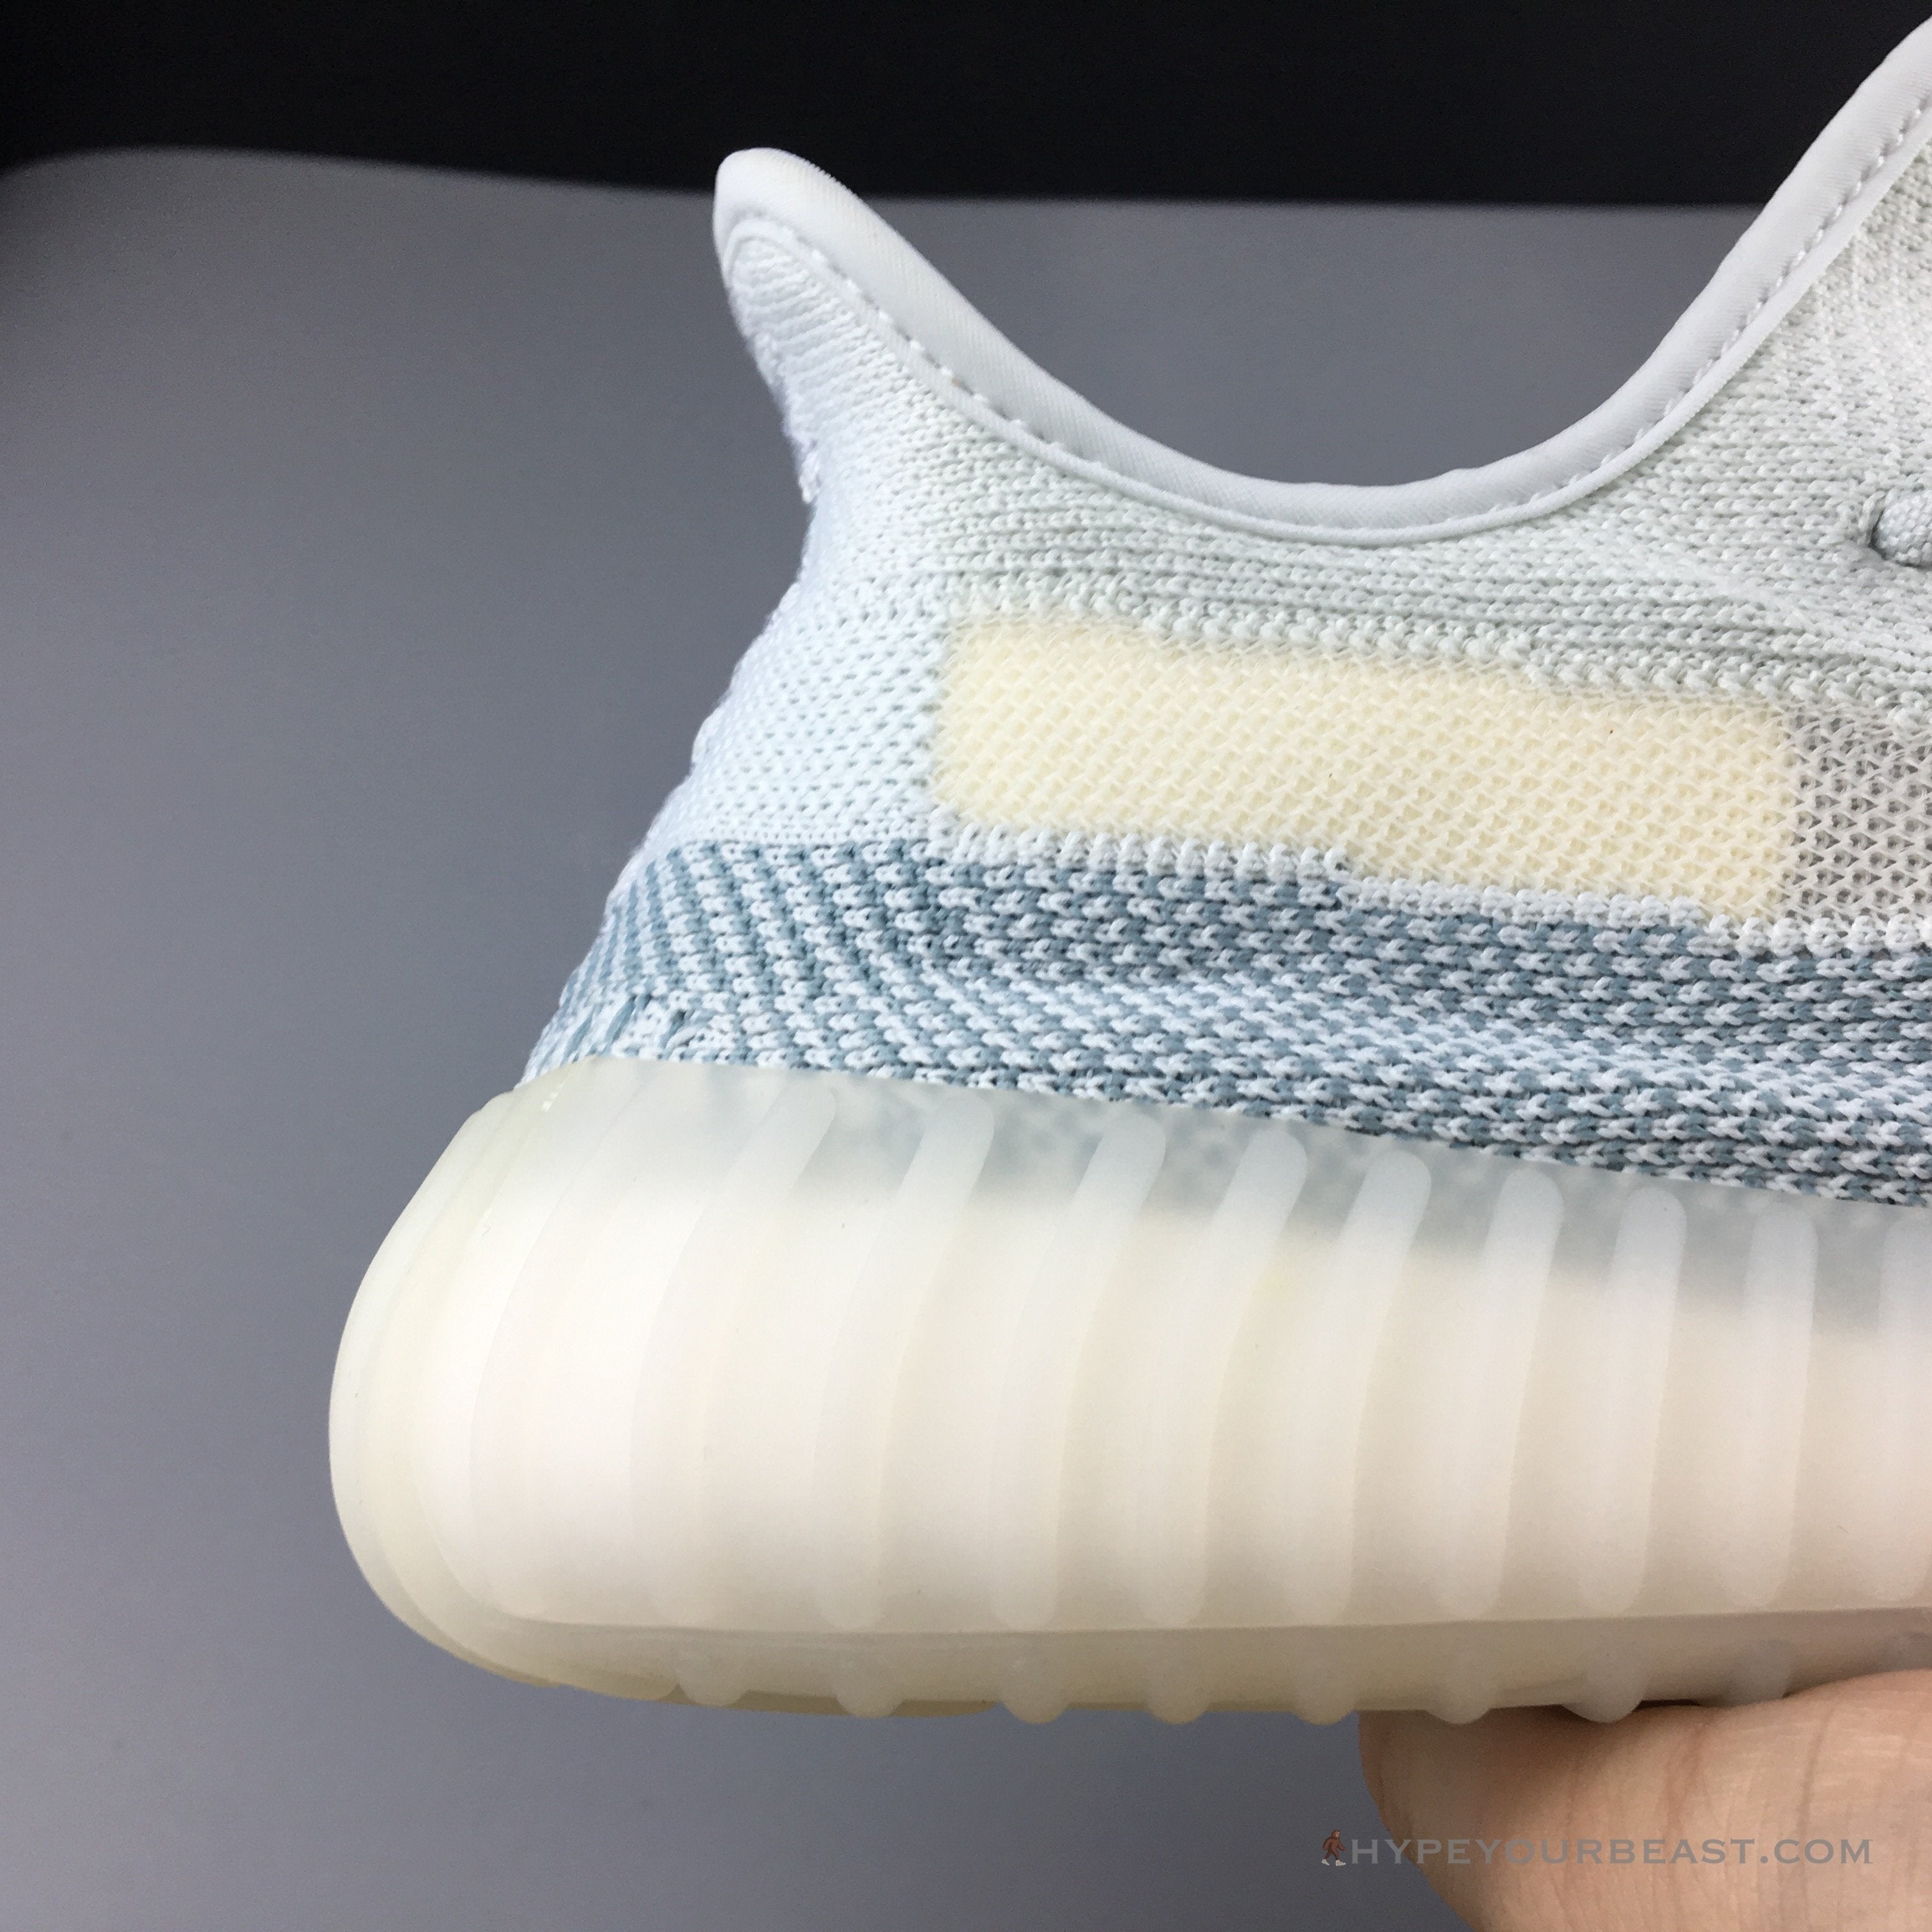 Adidas Yeezy Boost 350 V2 'Tailgate Blue'